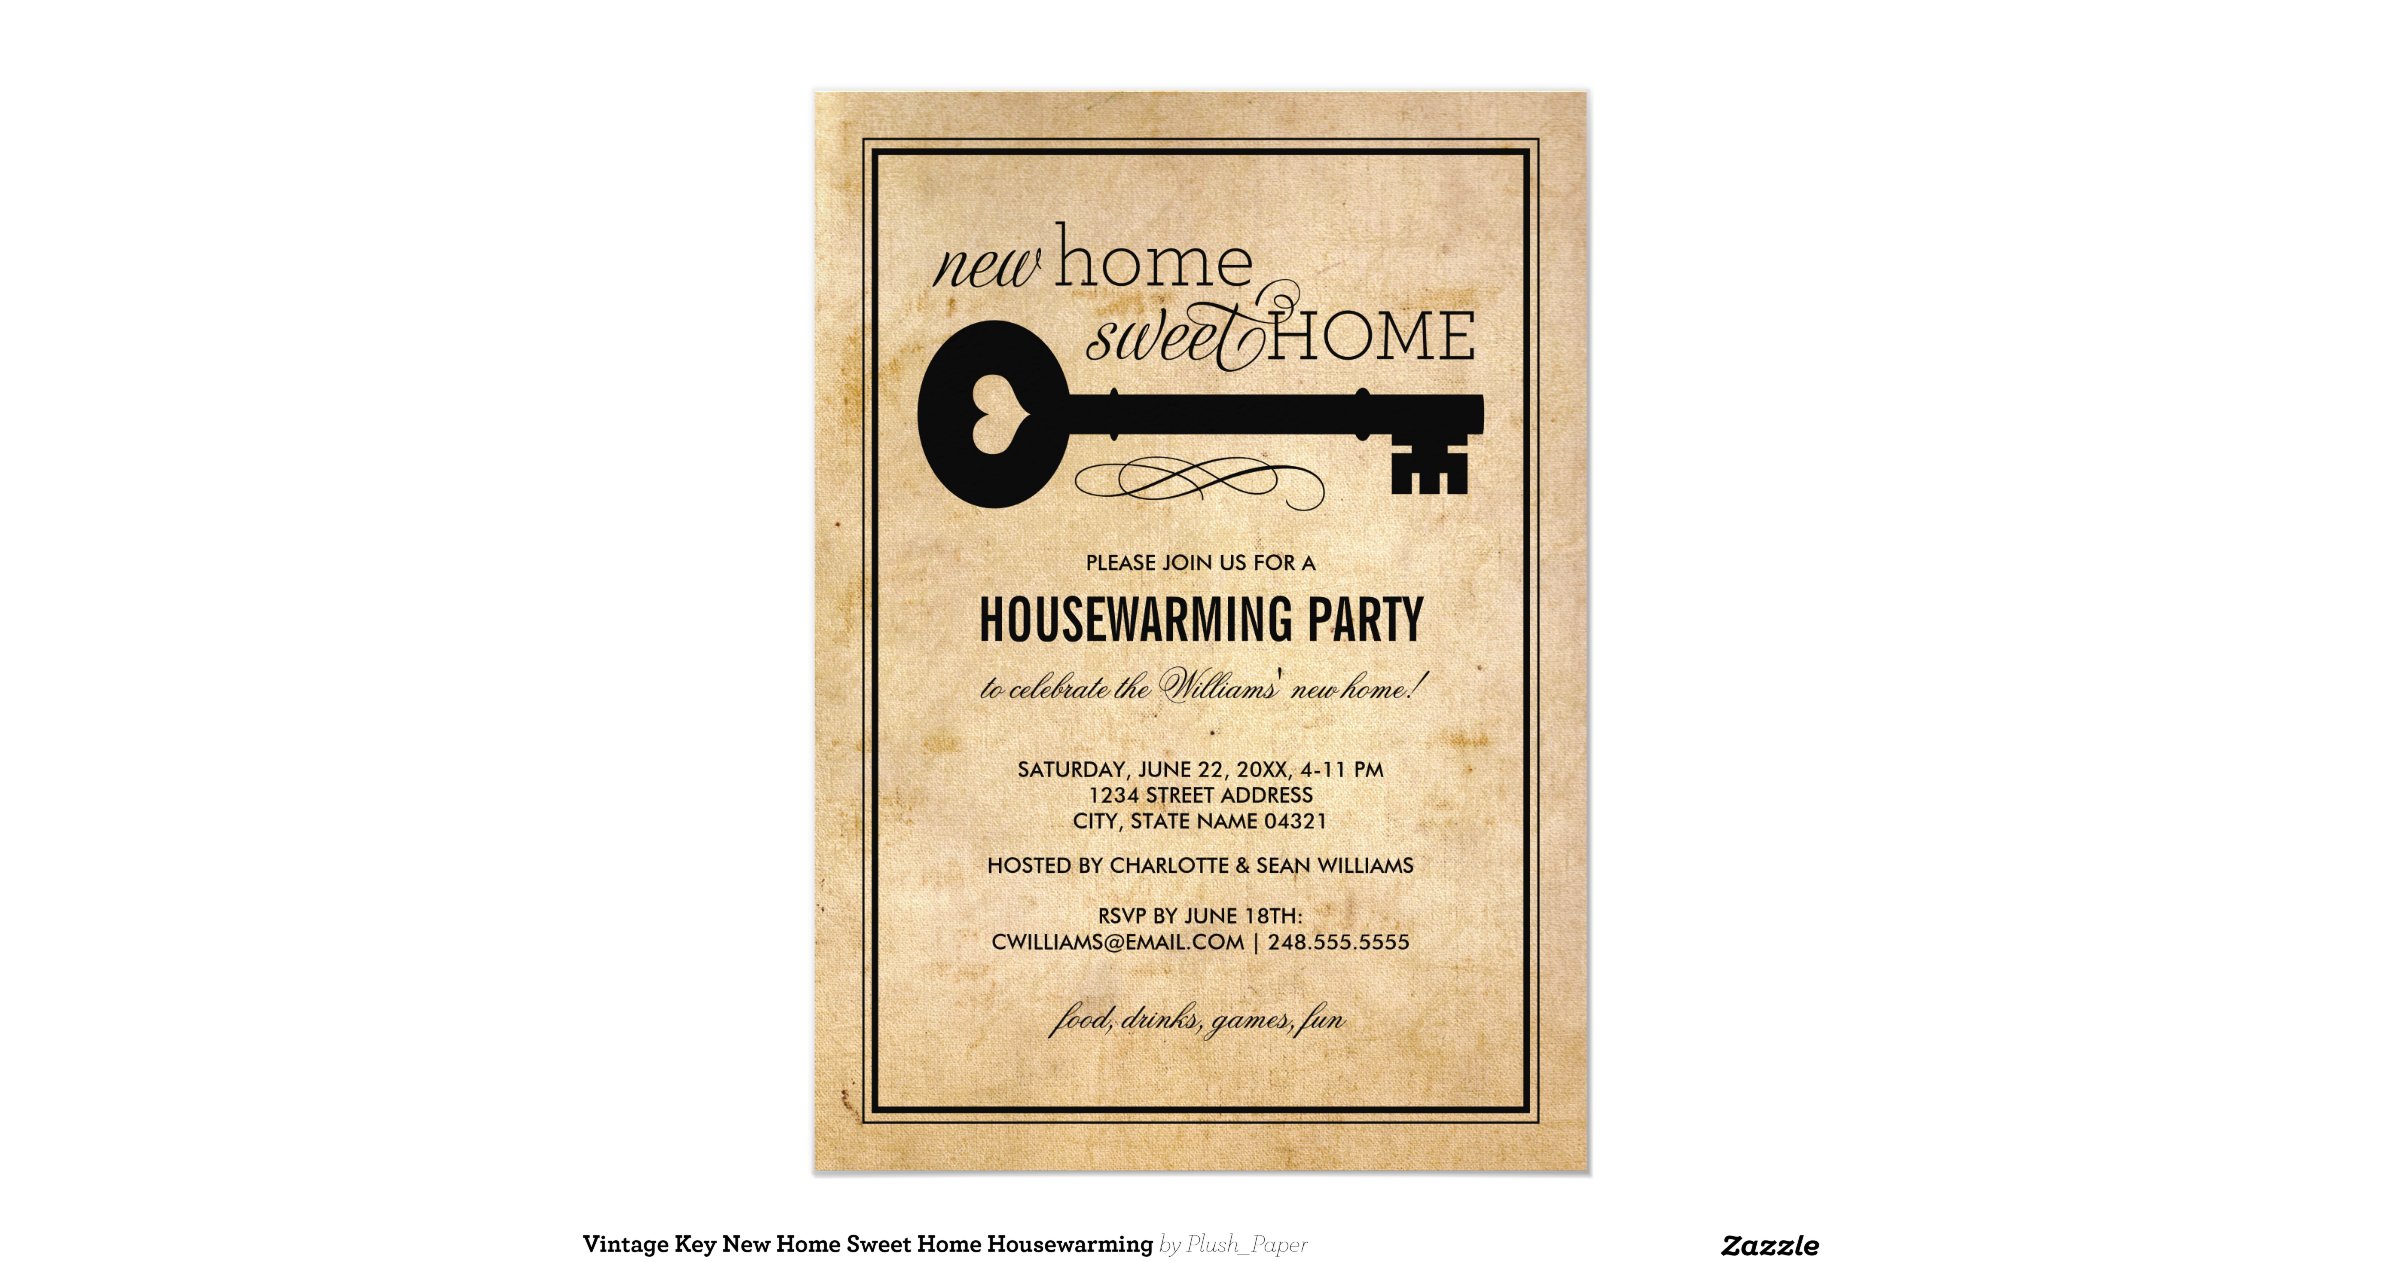 Housewarming Party | New Home Sweet Home 5x7 Paper Invitation Card | Zazzle